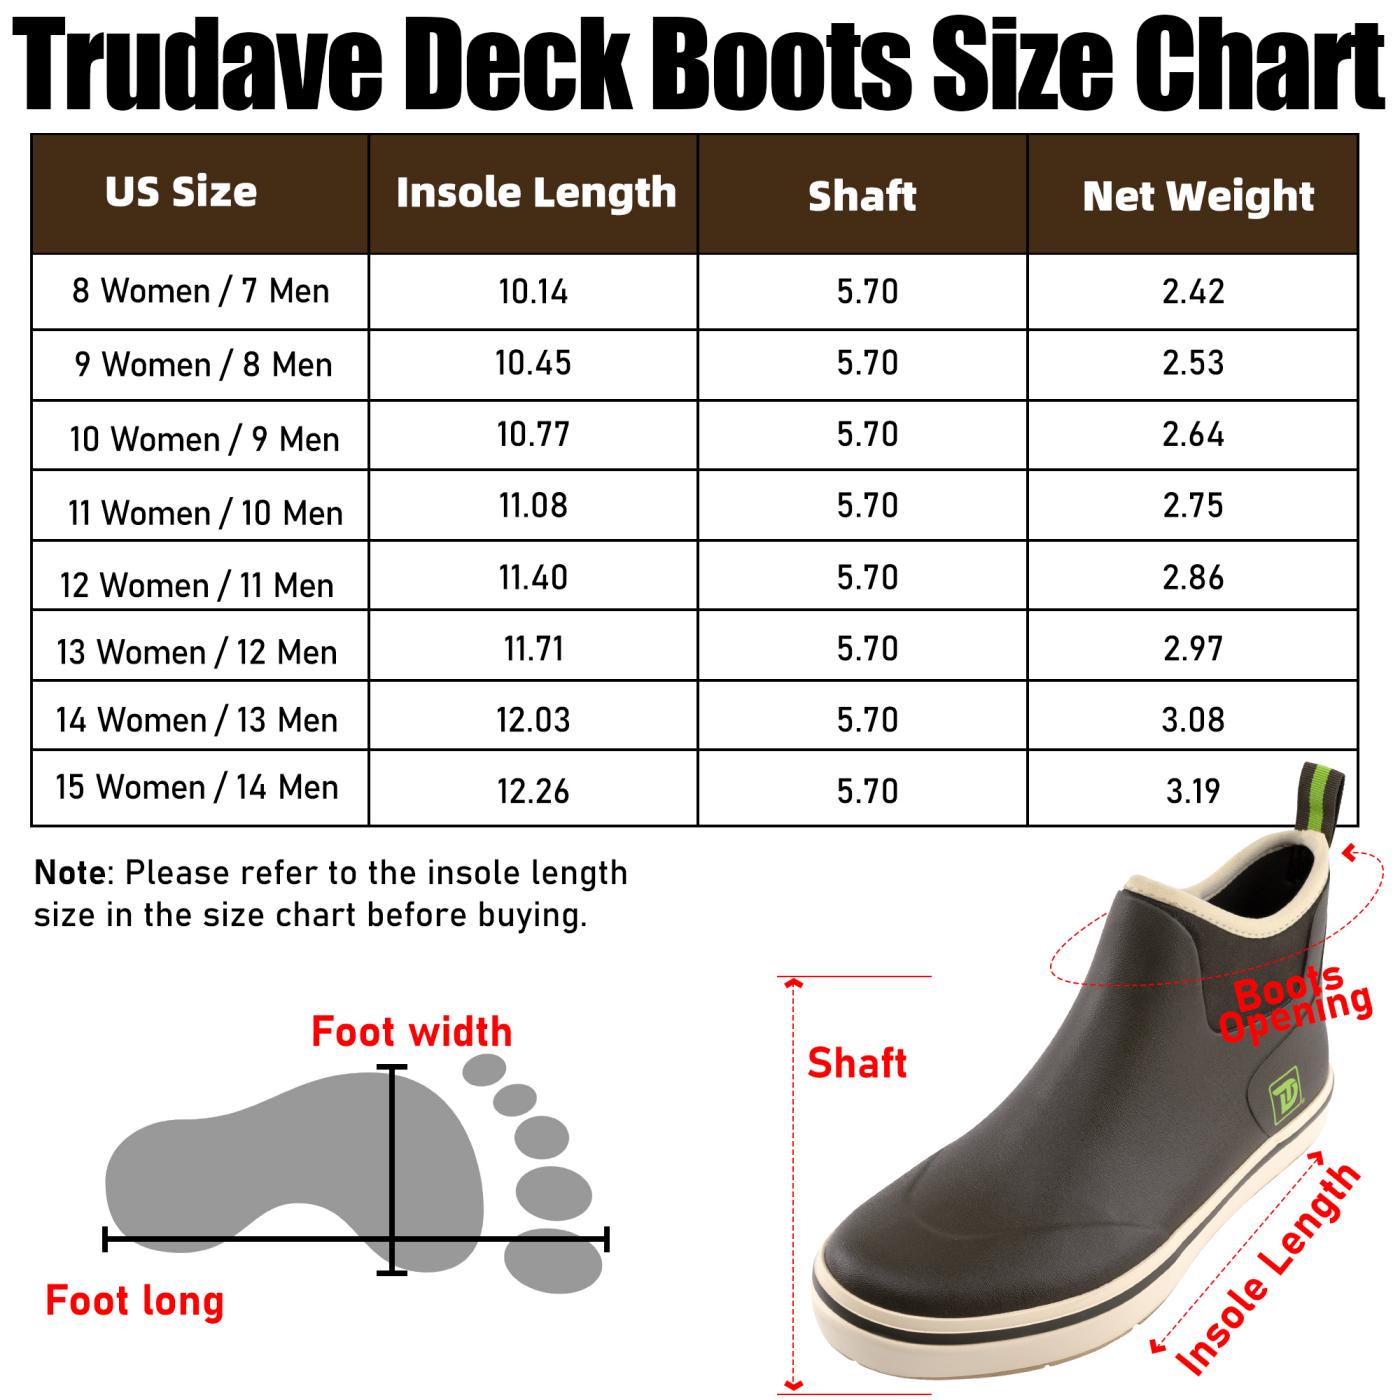 Trudave 5.7 INCH Men's Fishing Deck Boots-Blue